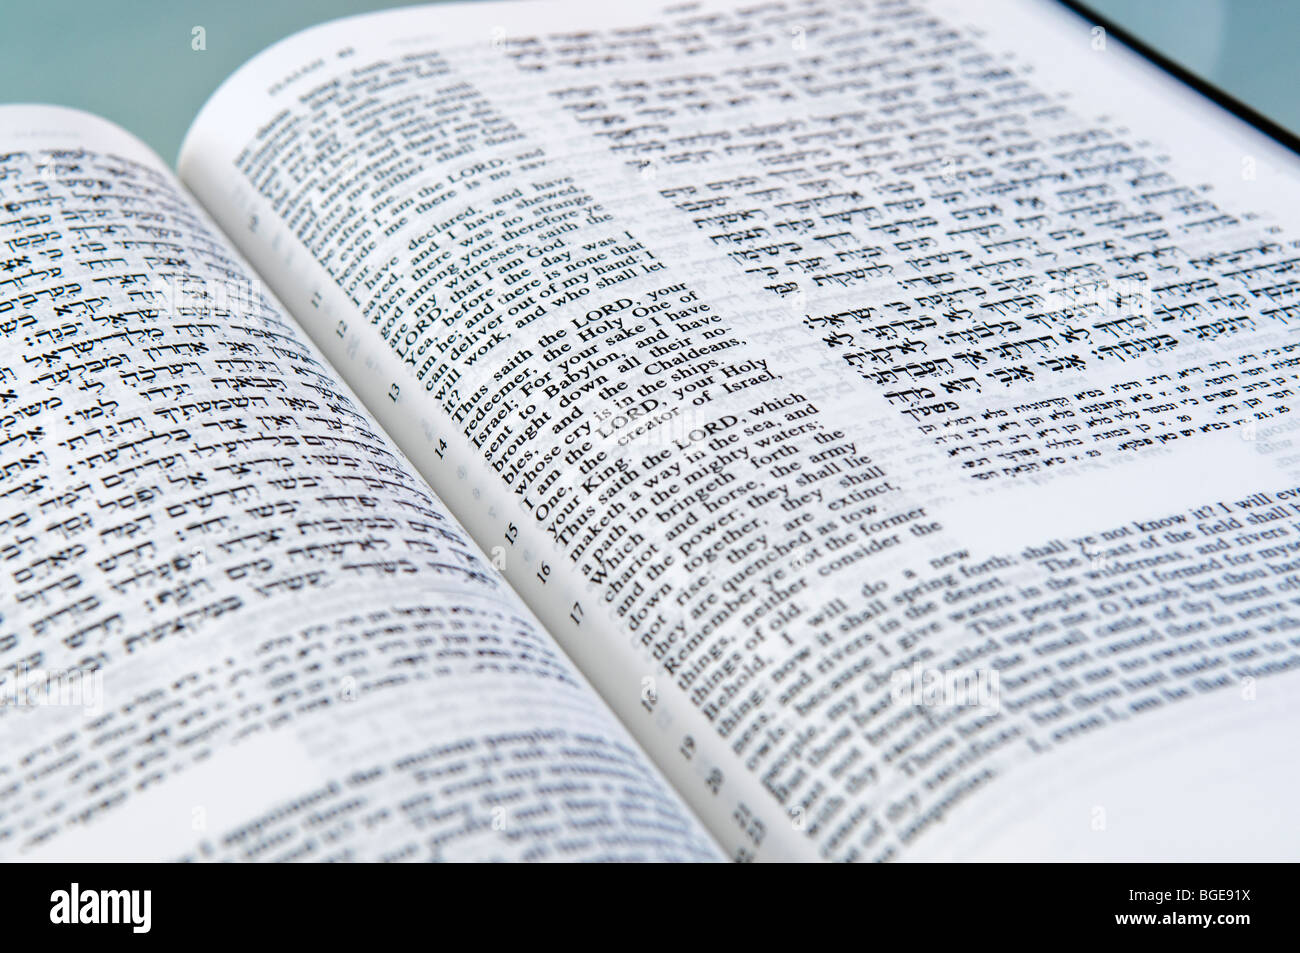 Page from the Jewish Holy Scriptures showing both Hebrew and English translation Stock Photo